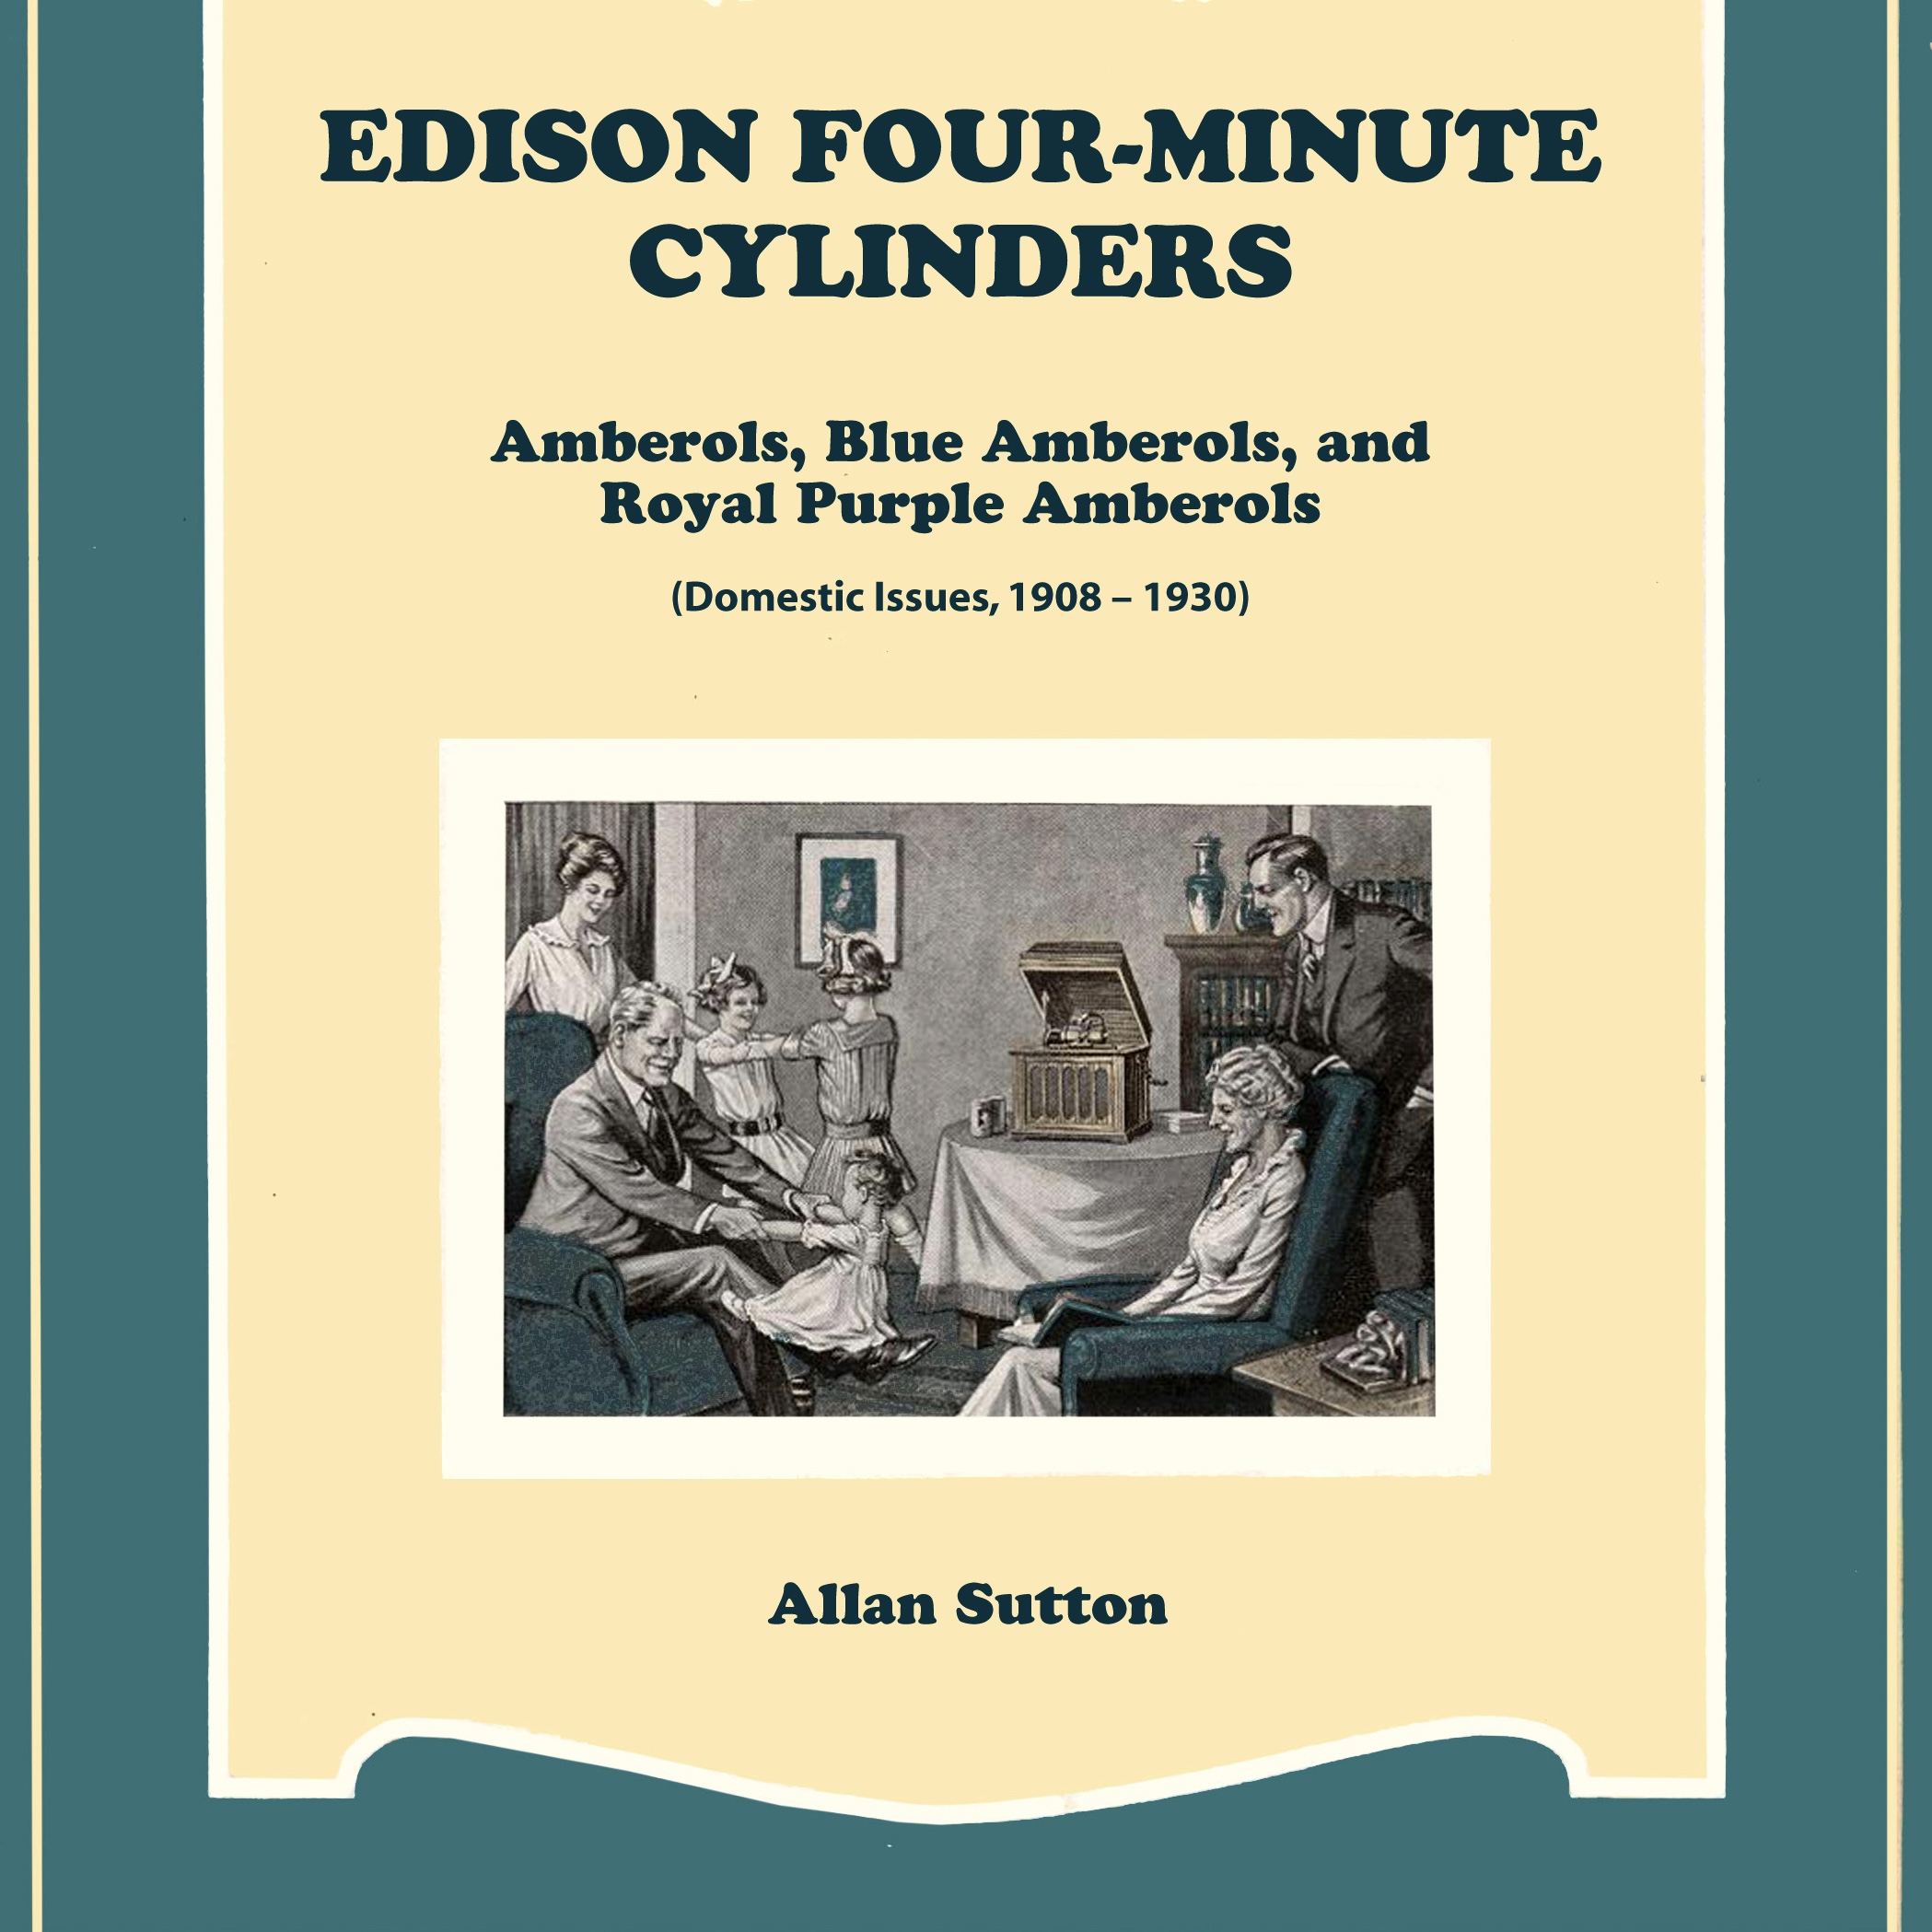 Edison Four-Minute Cylinders